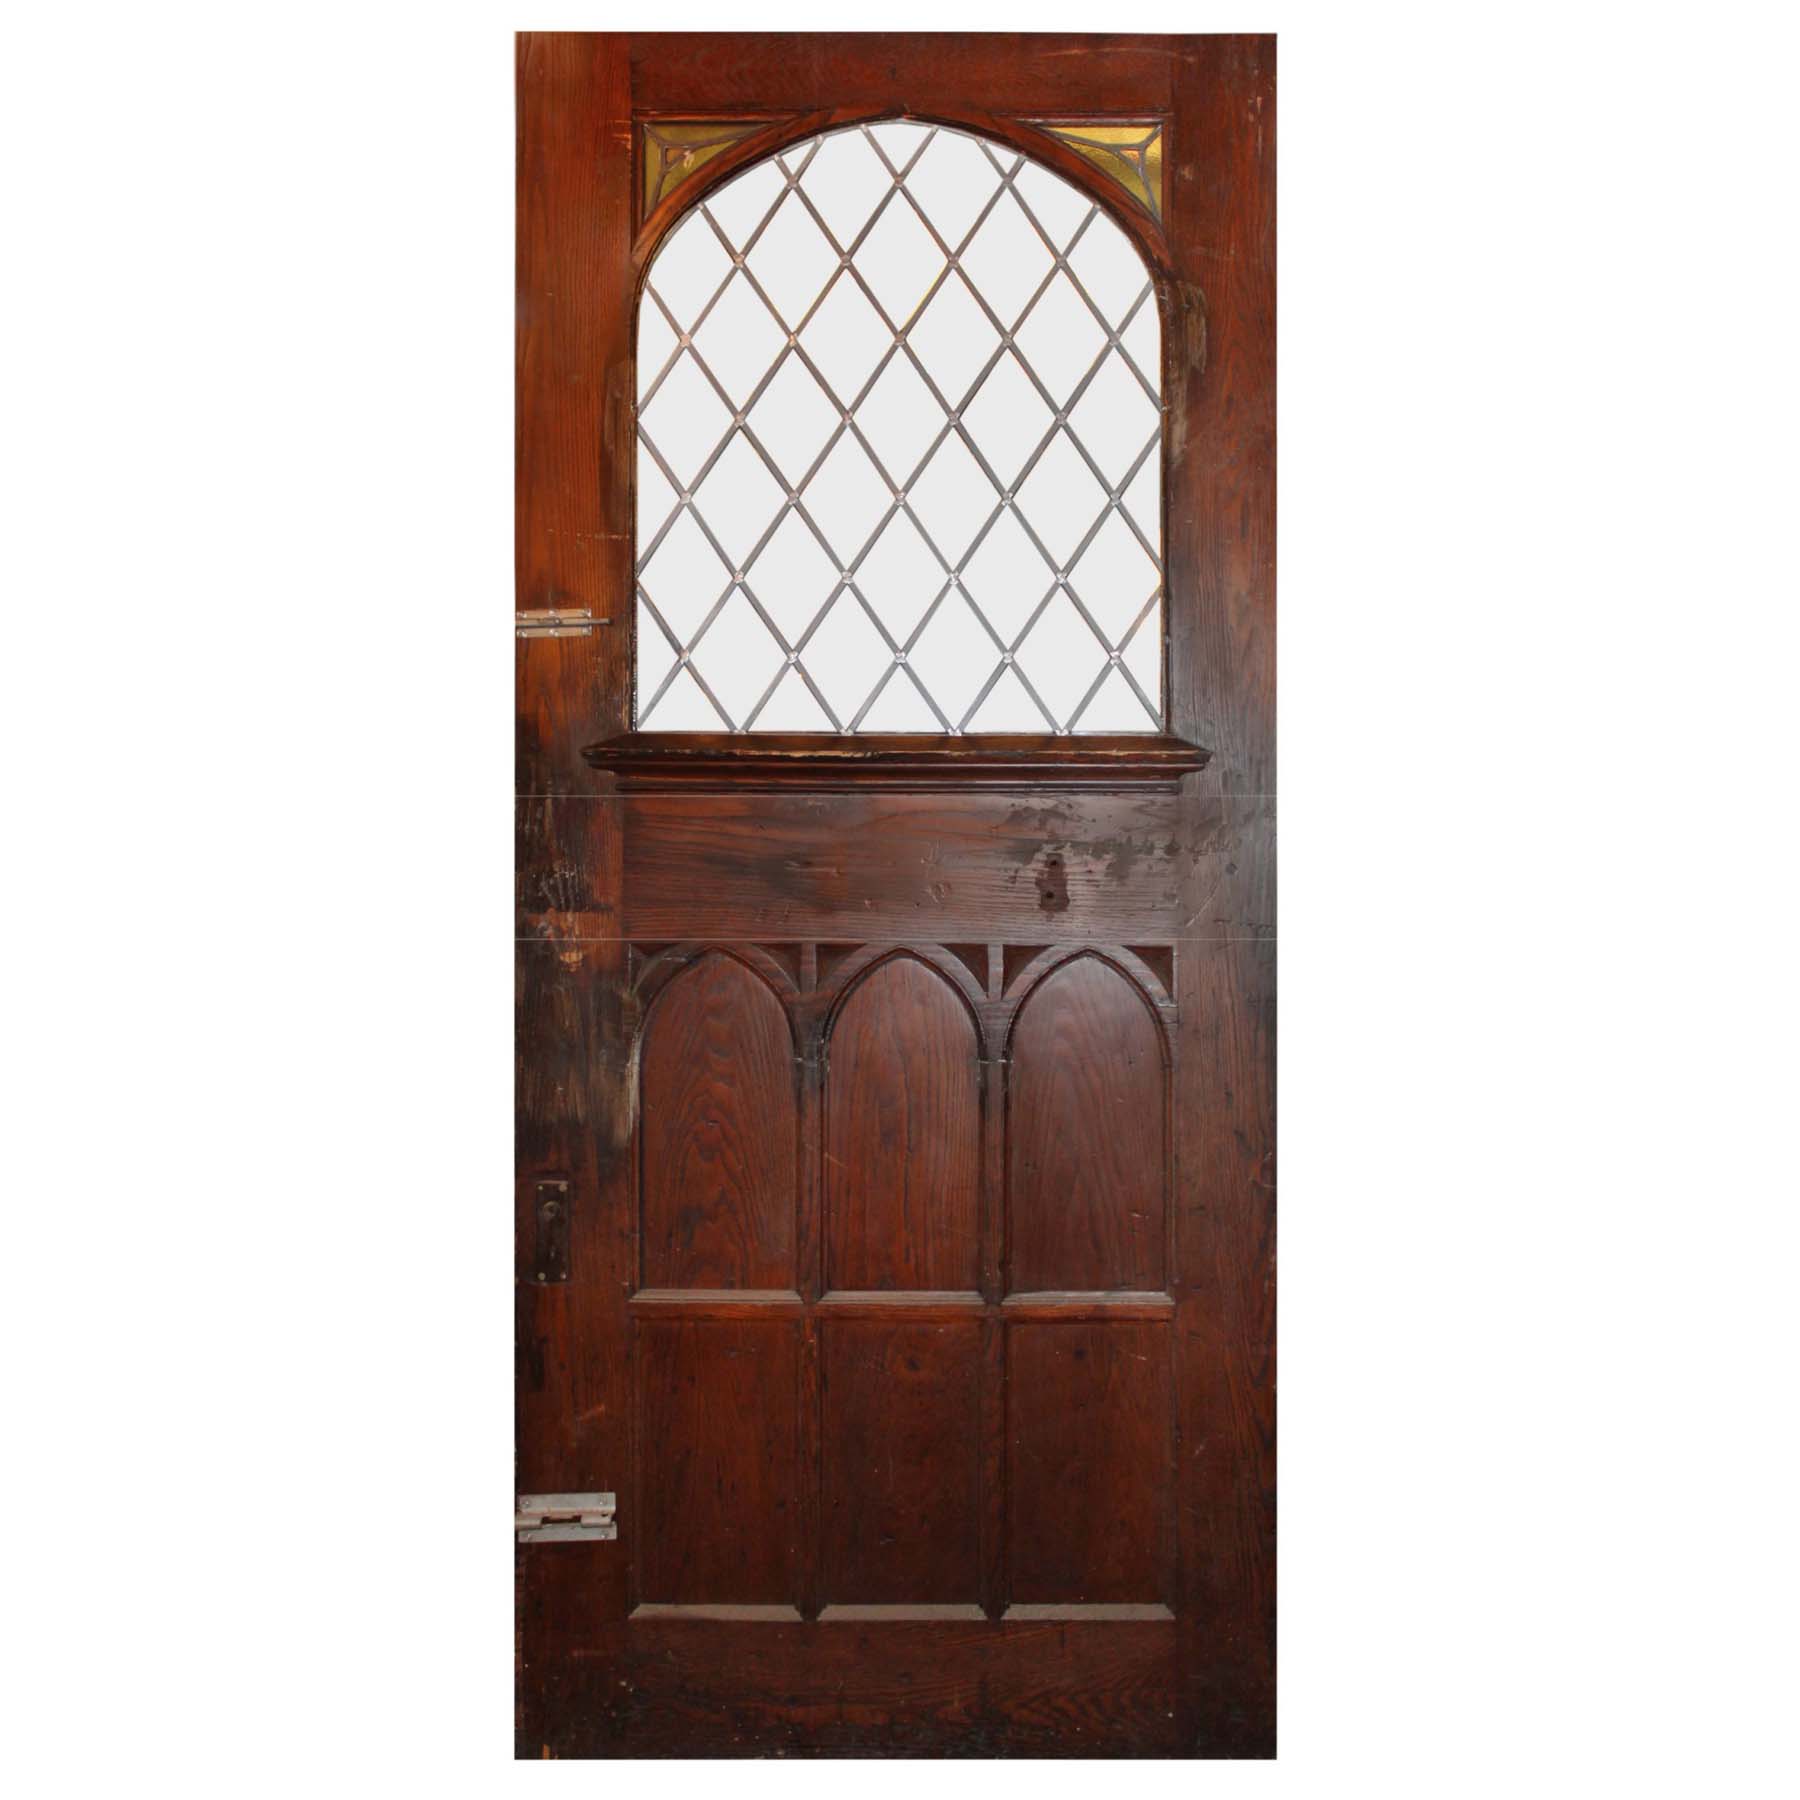 Substantial 47” Salvaged Oak Door with Gothic Arch Window-70321